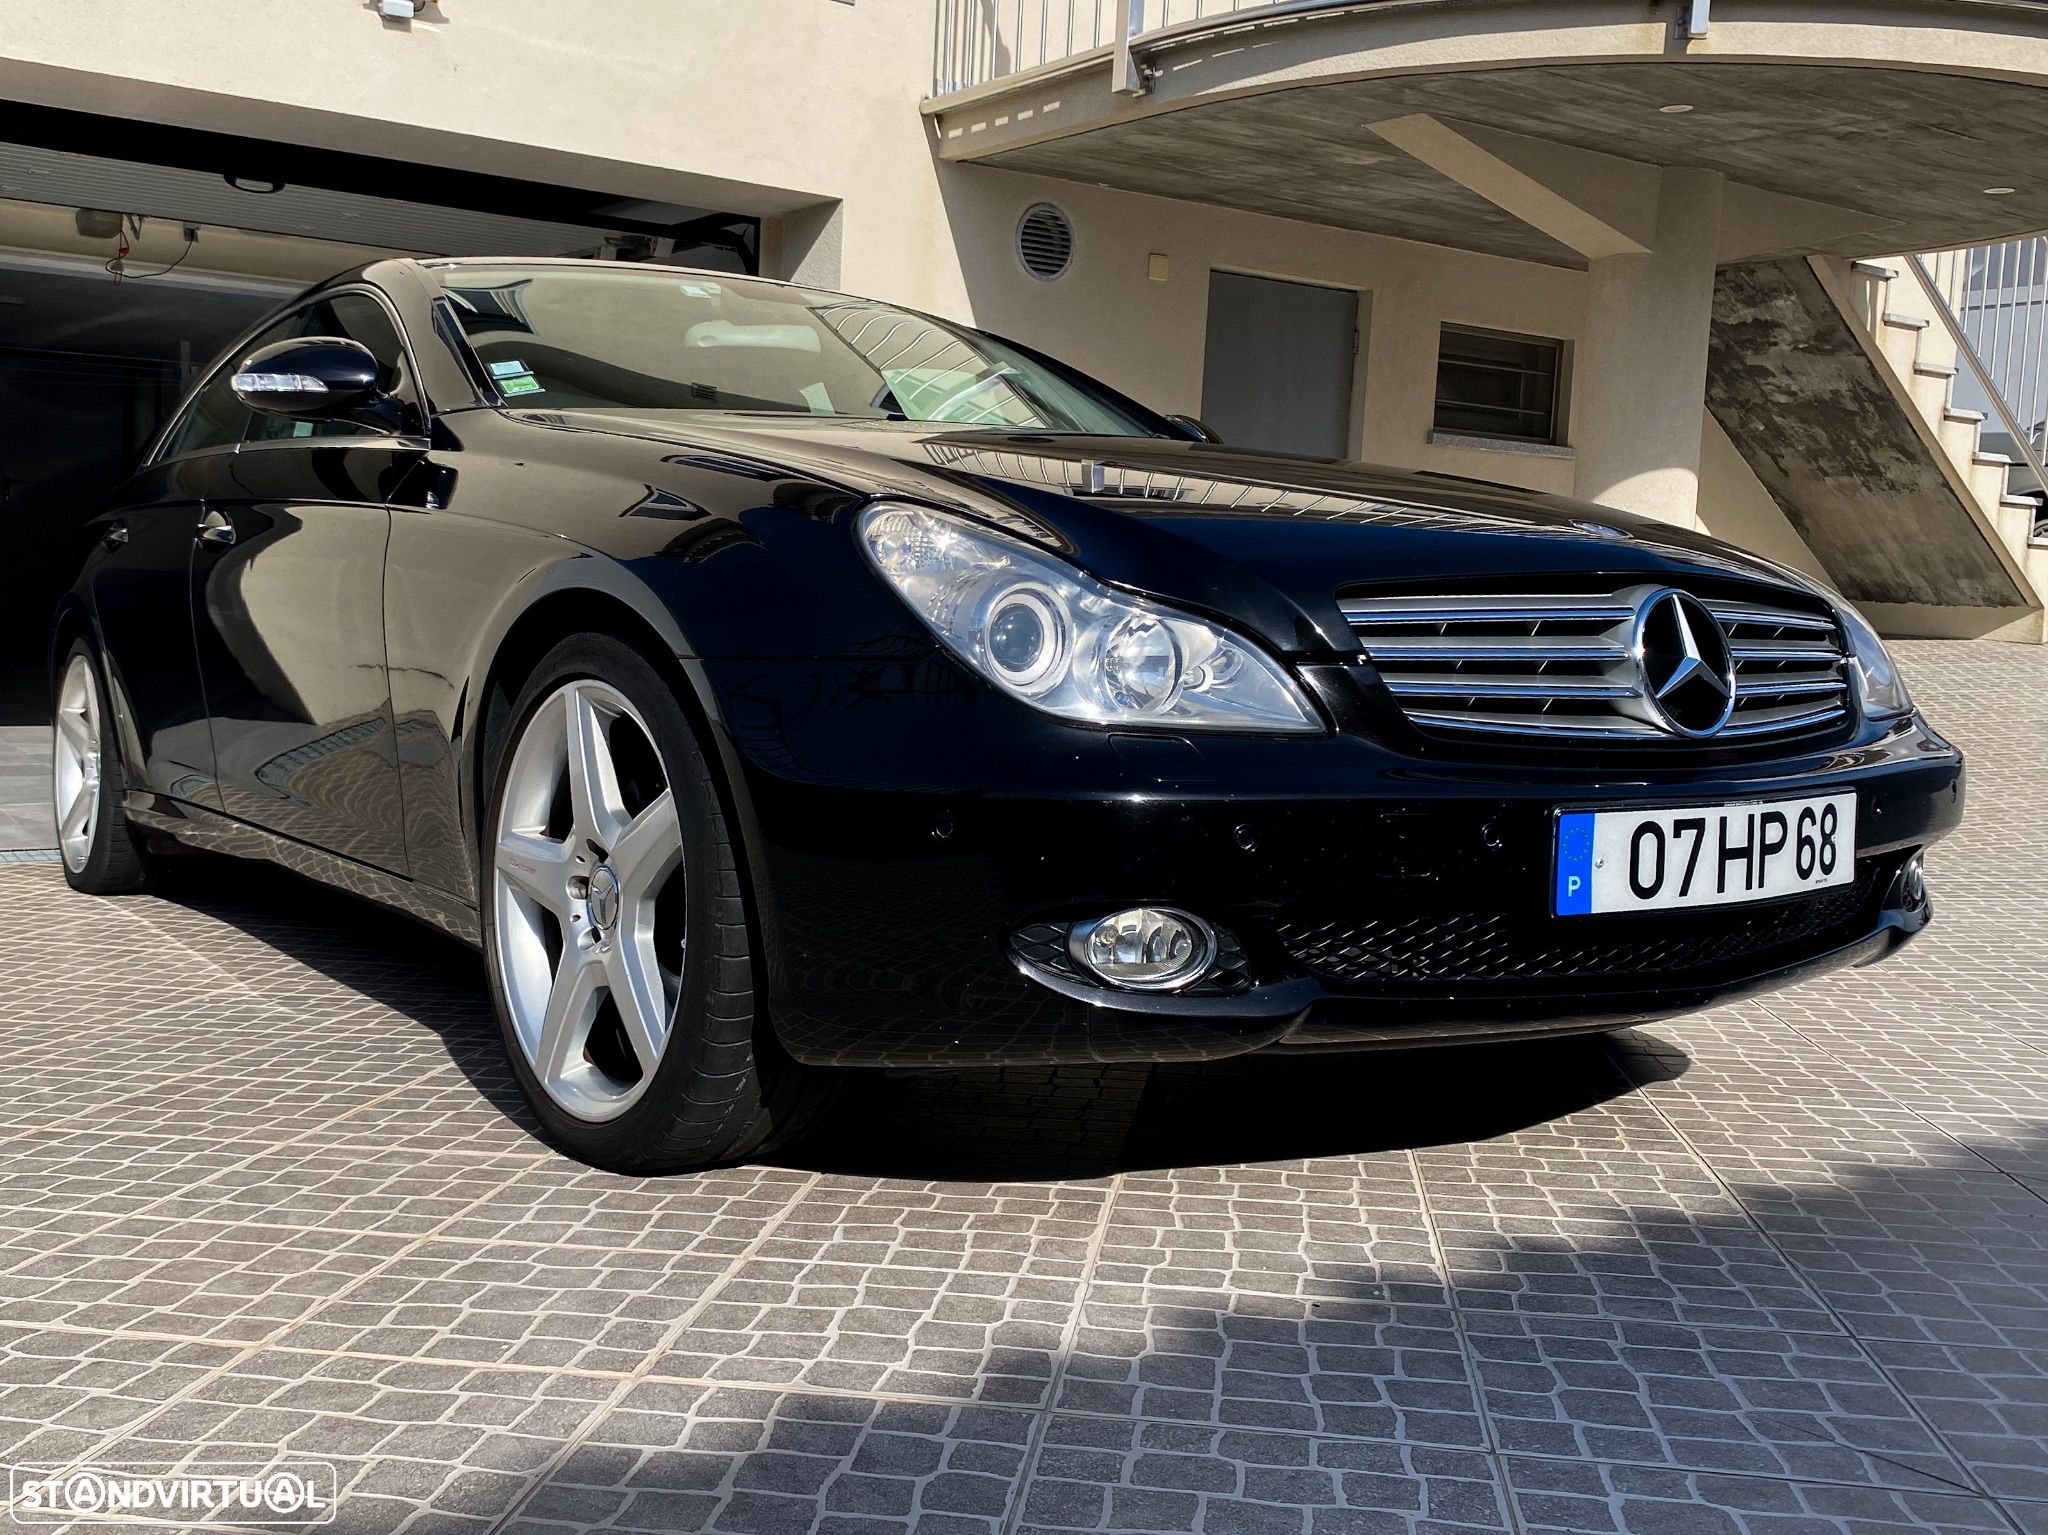 Mercedes-Benz CLS 320 CDI 7G-TRONIC Grand Edition - 1